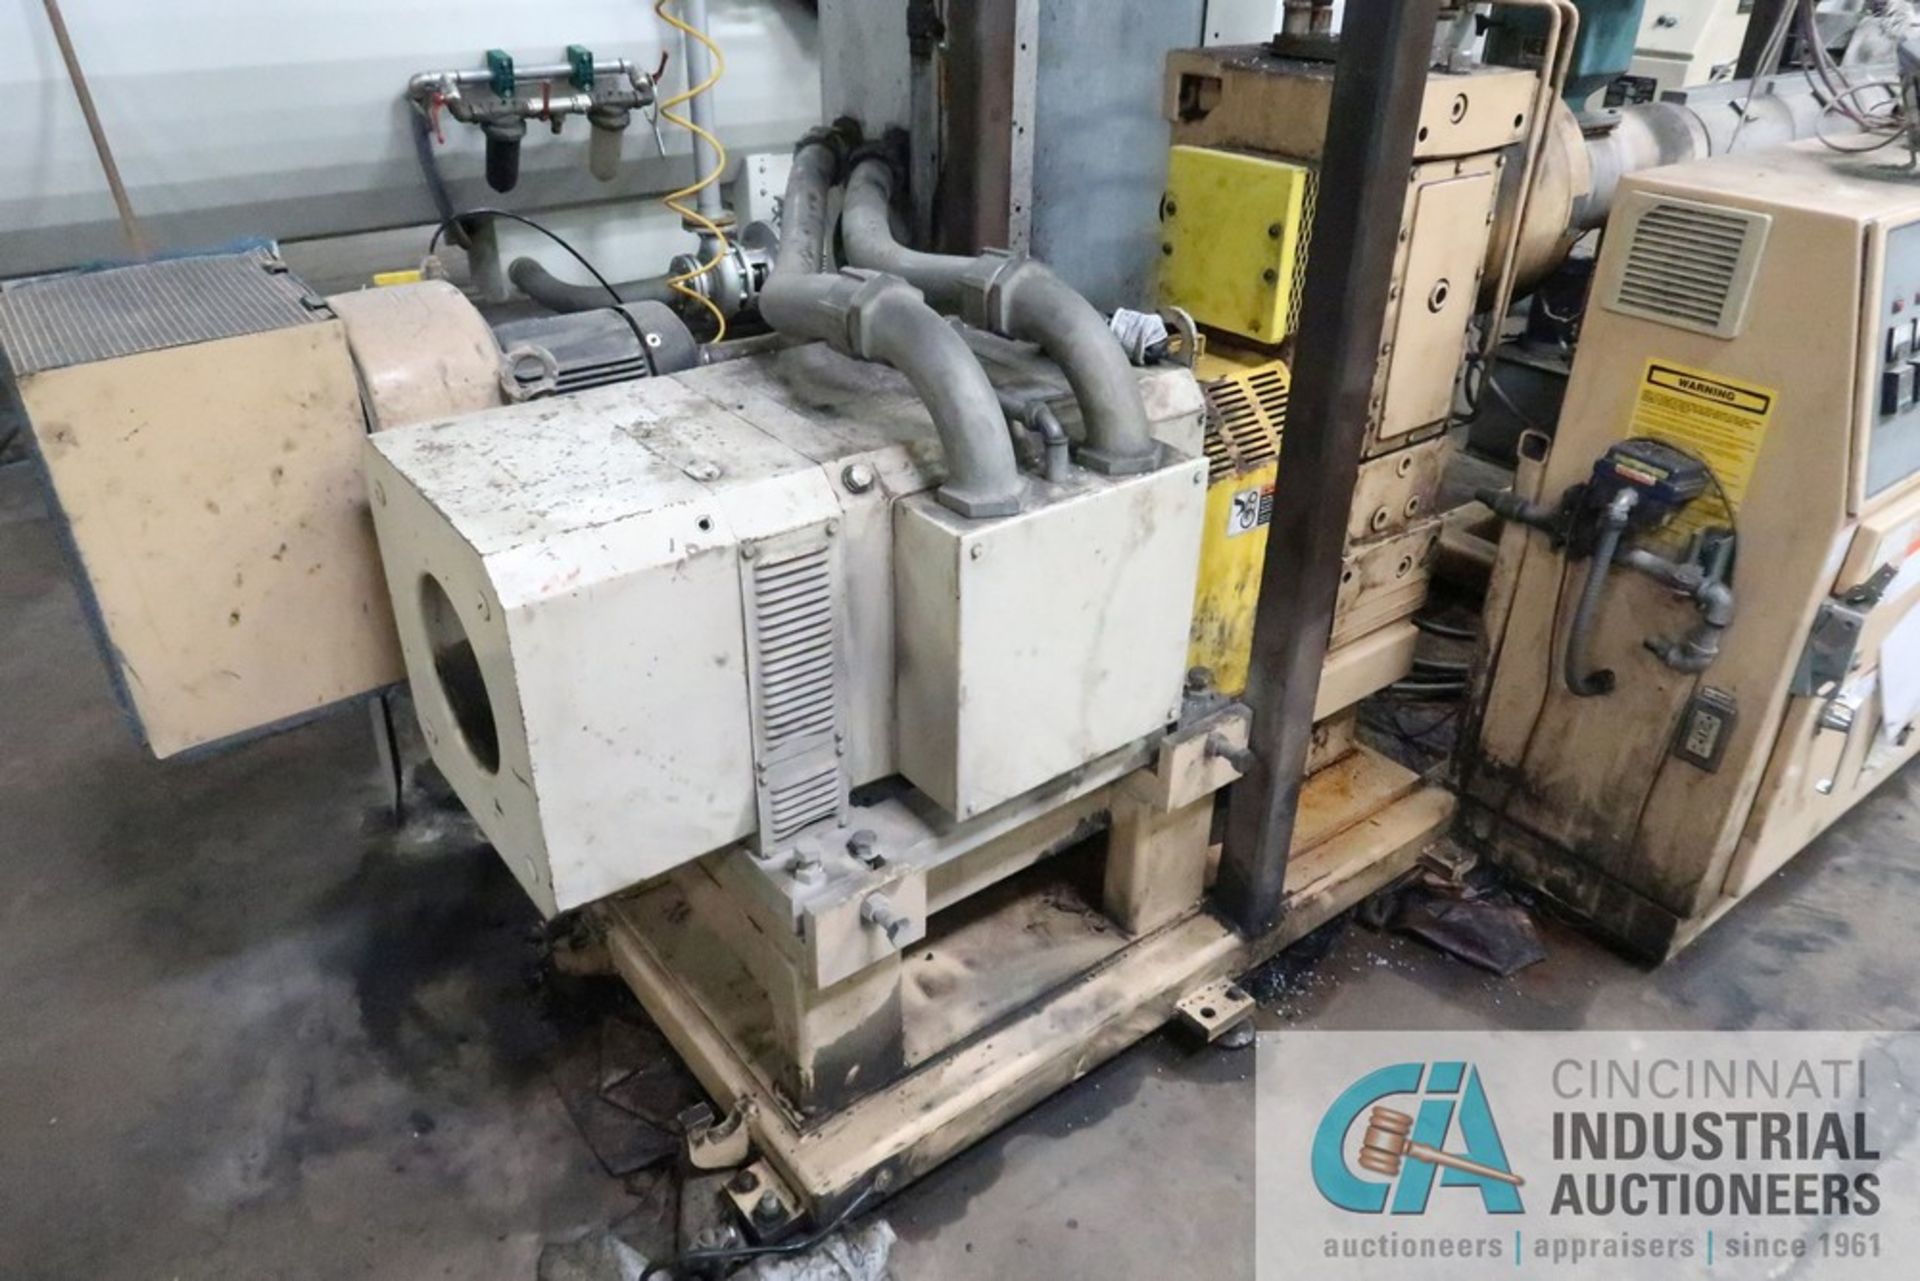 60 MM AMERICAN MAPLAN MODEL AM-B60-BOM-013 EXTRUDER; S/N 168221, 225 HP MOTOR, VARIABLE SPEED DRIVE, - Image 13 of 17